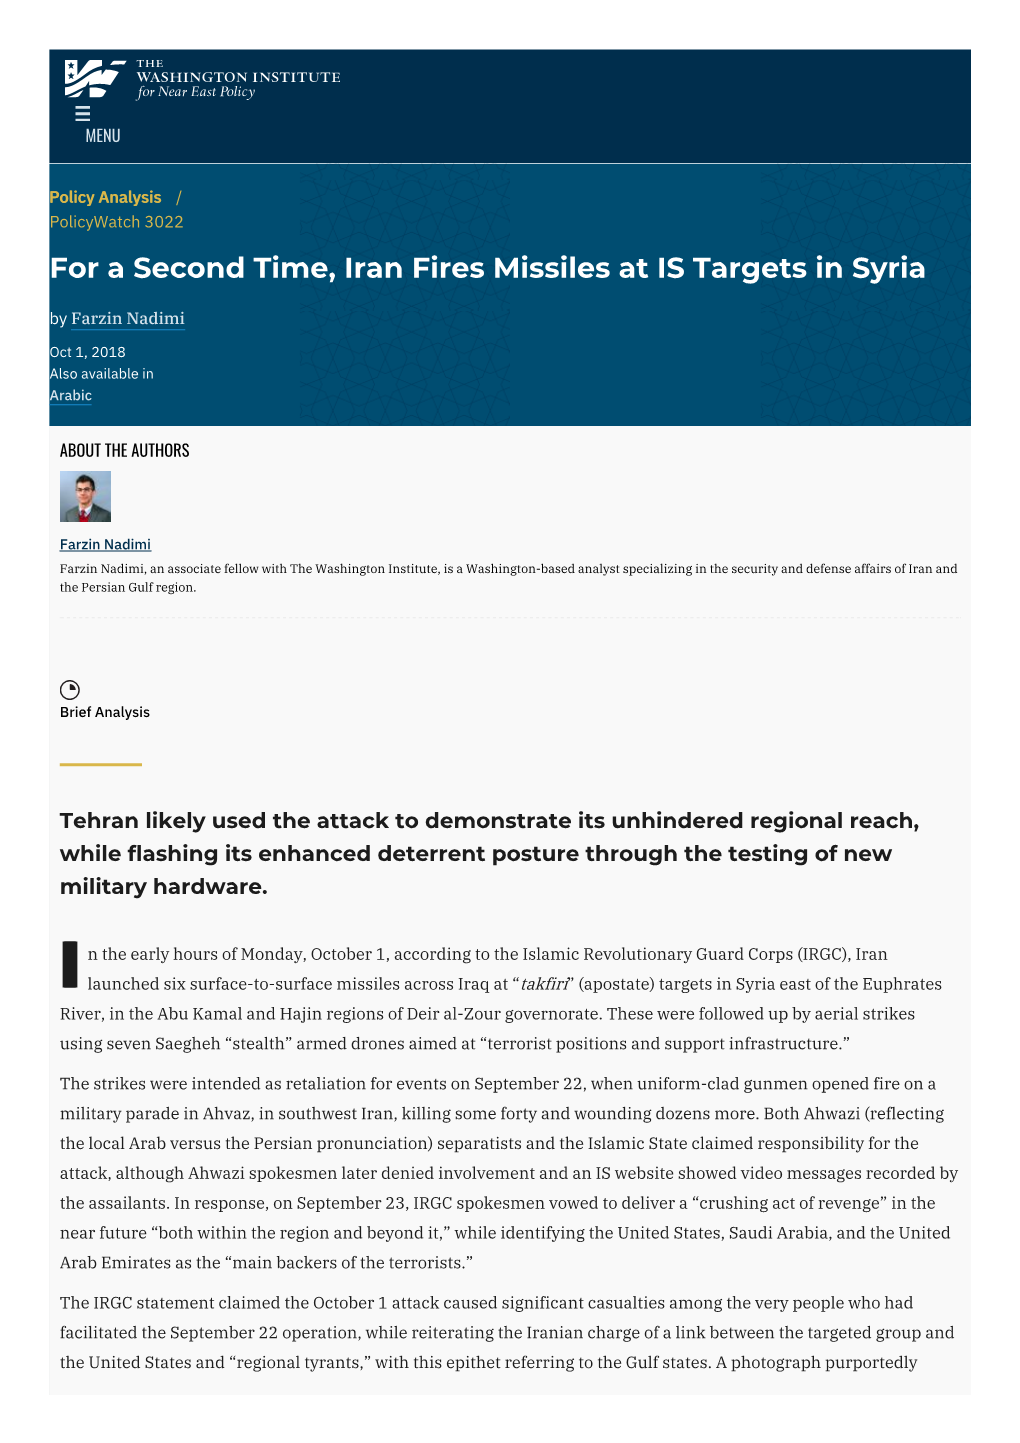 For a Second Time, Iran Fires Missiles at IS Targets in Syria by Farzin Nadimi